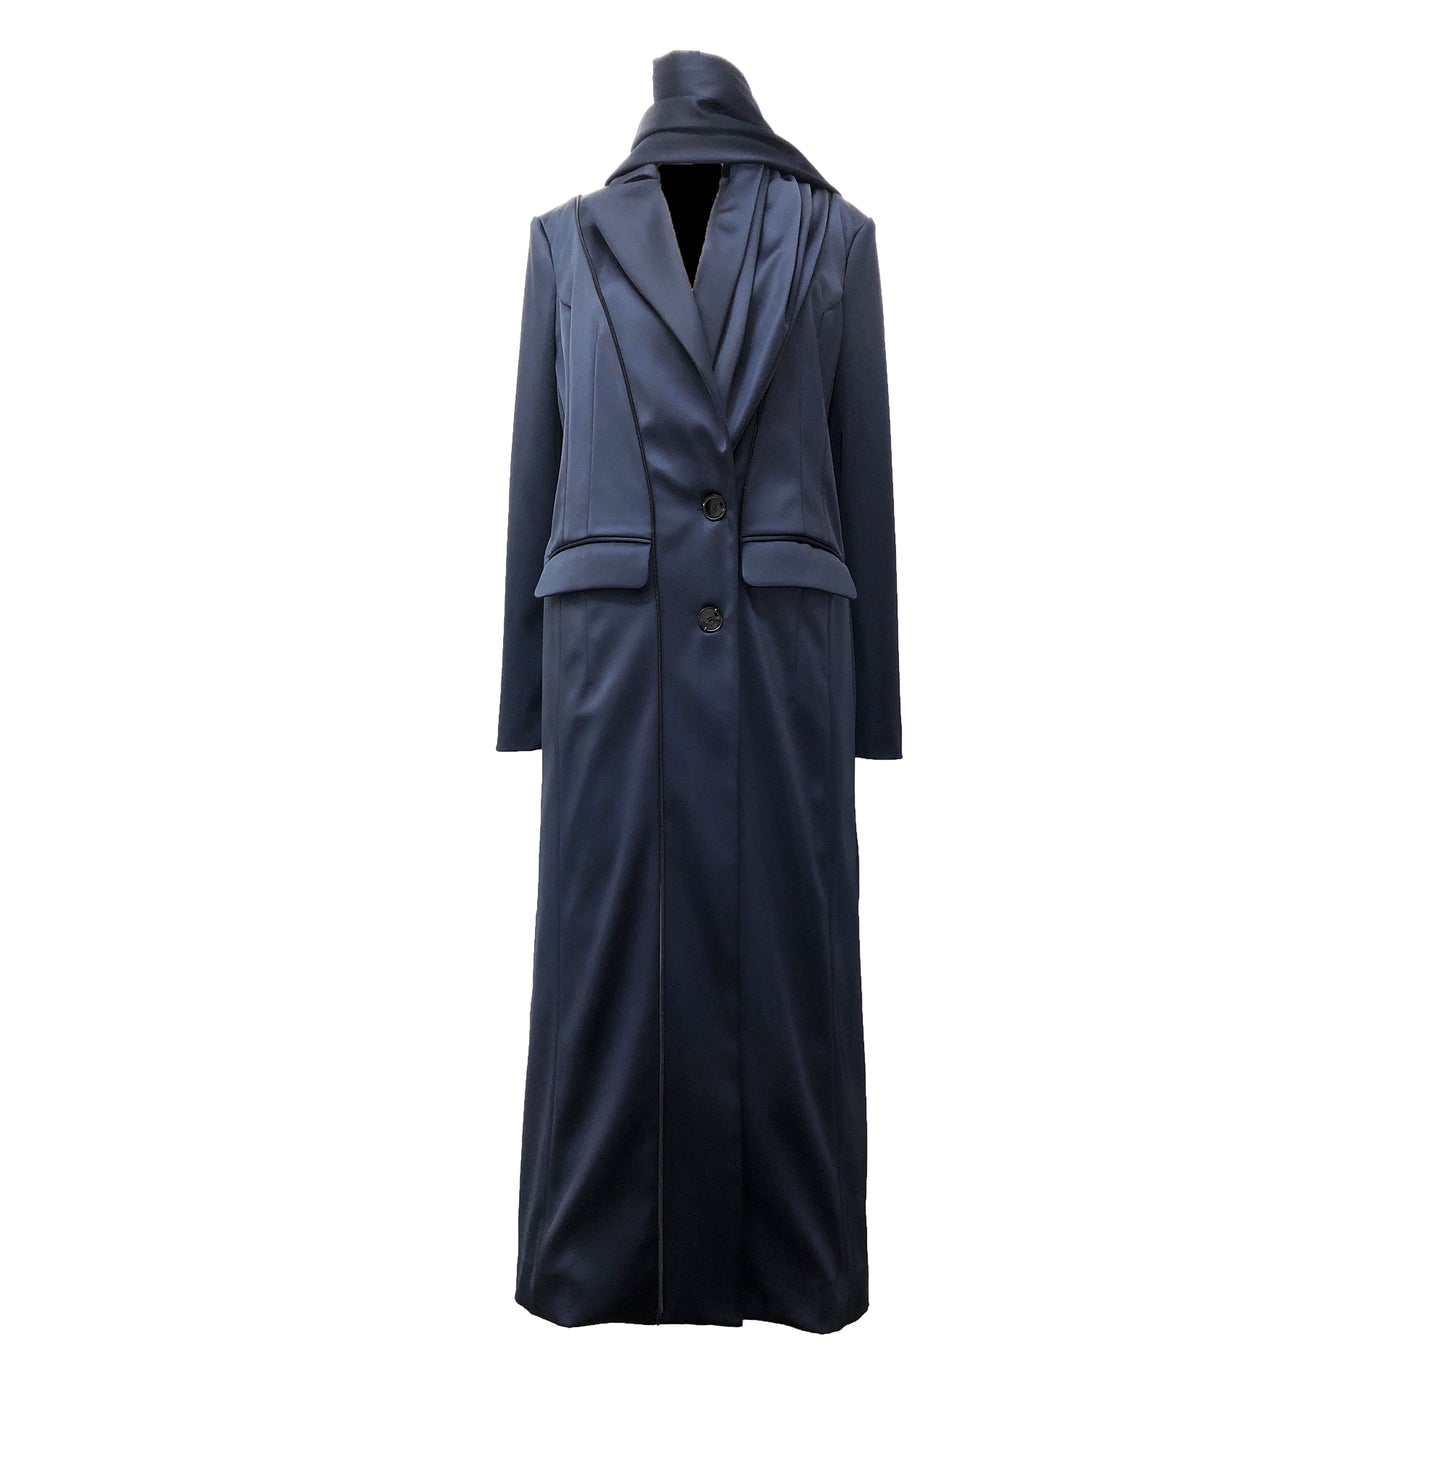 Navy stretch satin coat with transformable zippers and self tie belt with draped detail over the neck